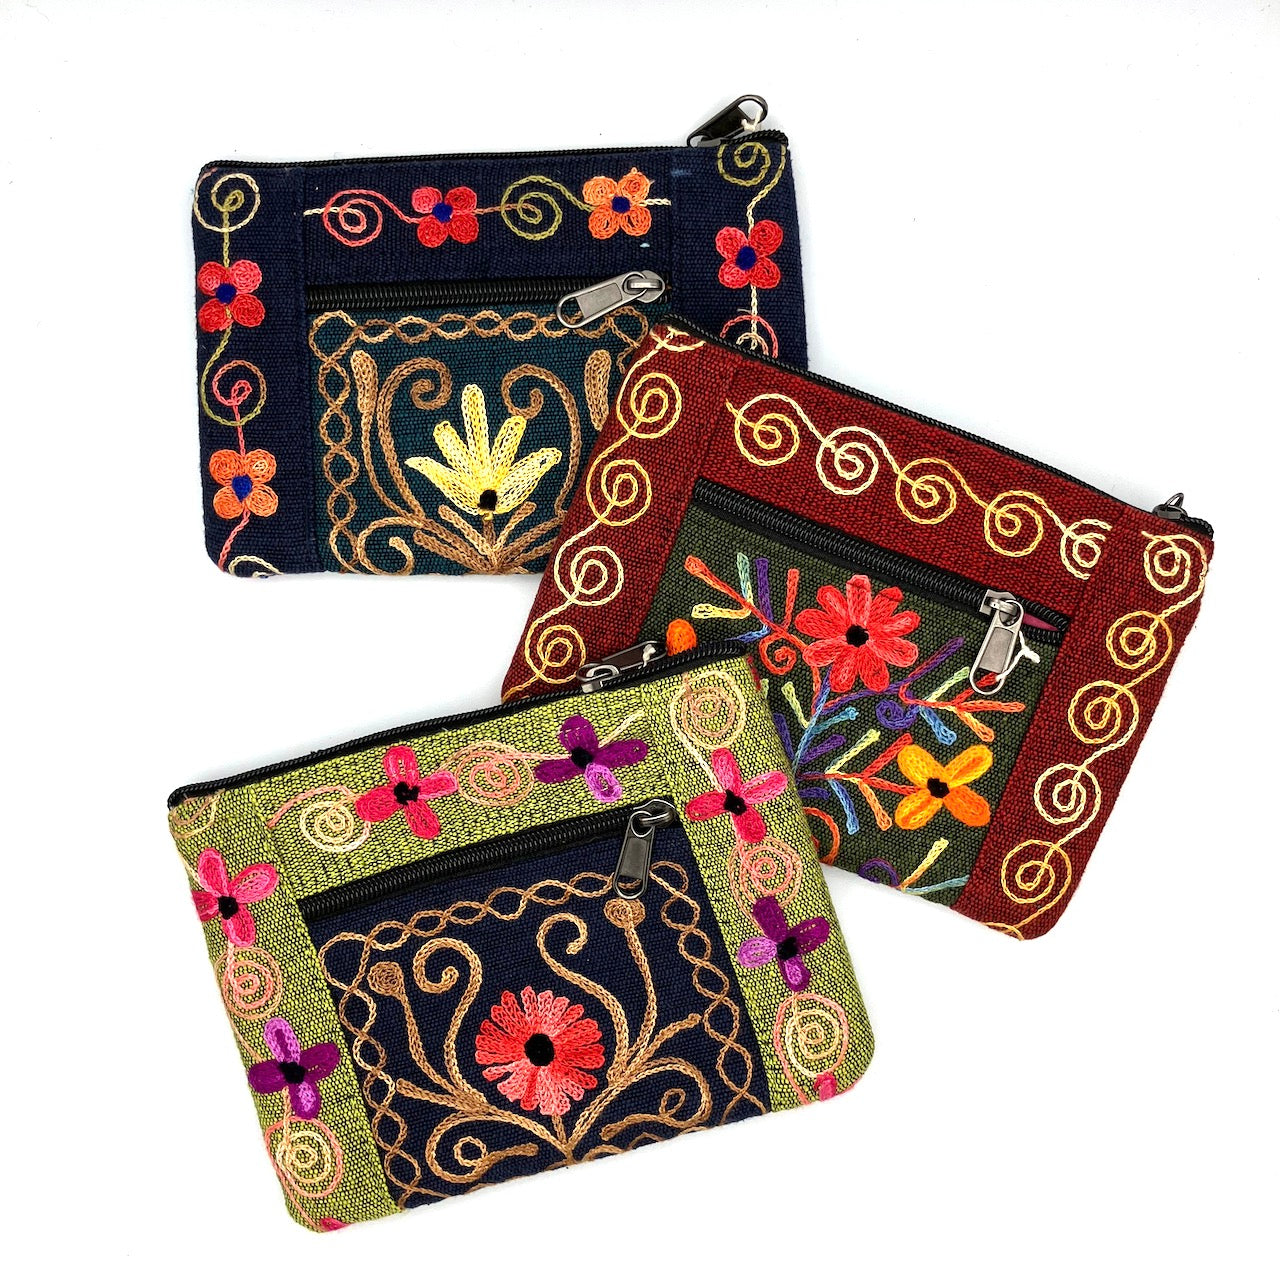 Embroidered Floral 2-Zip Accessory Purse